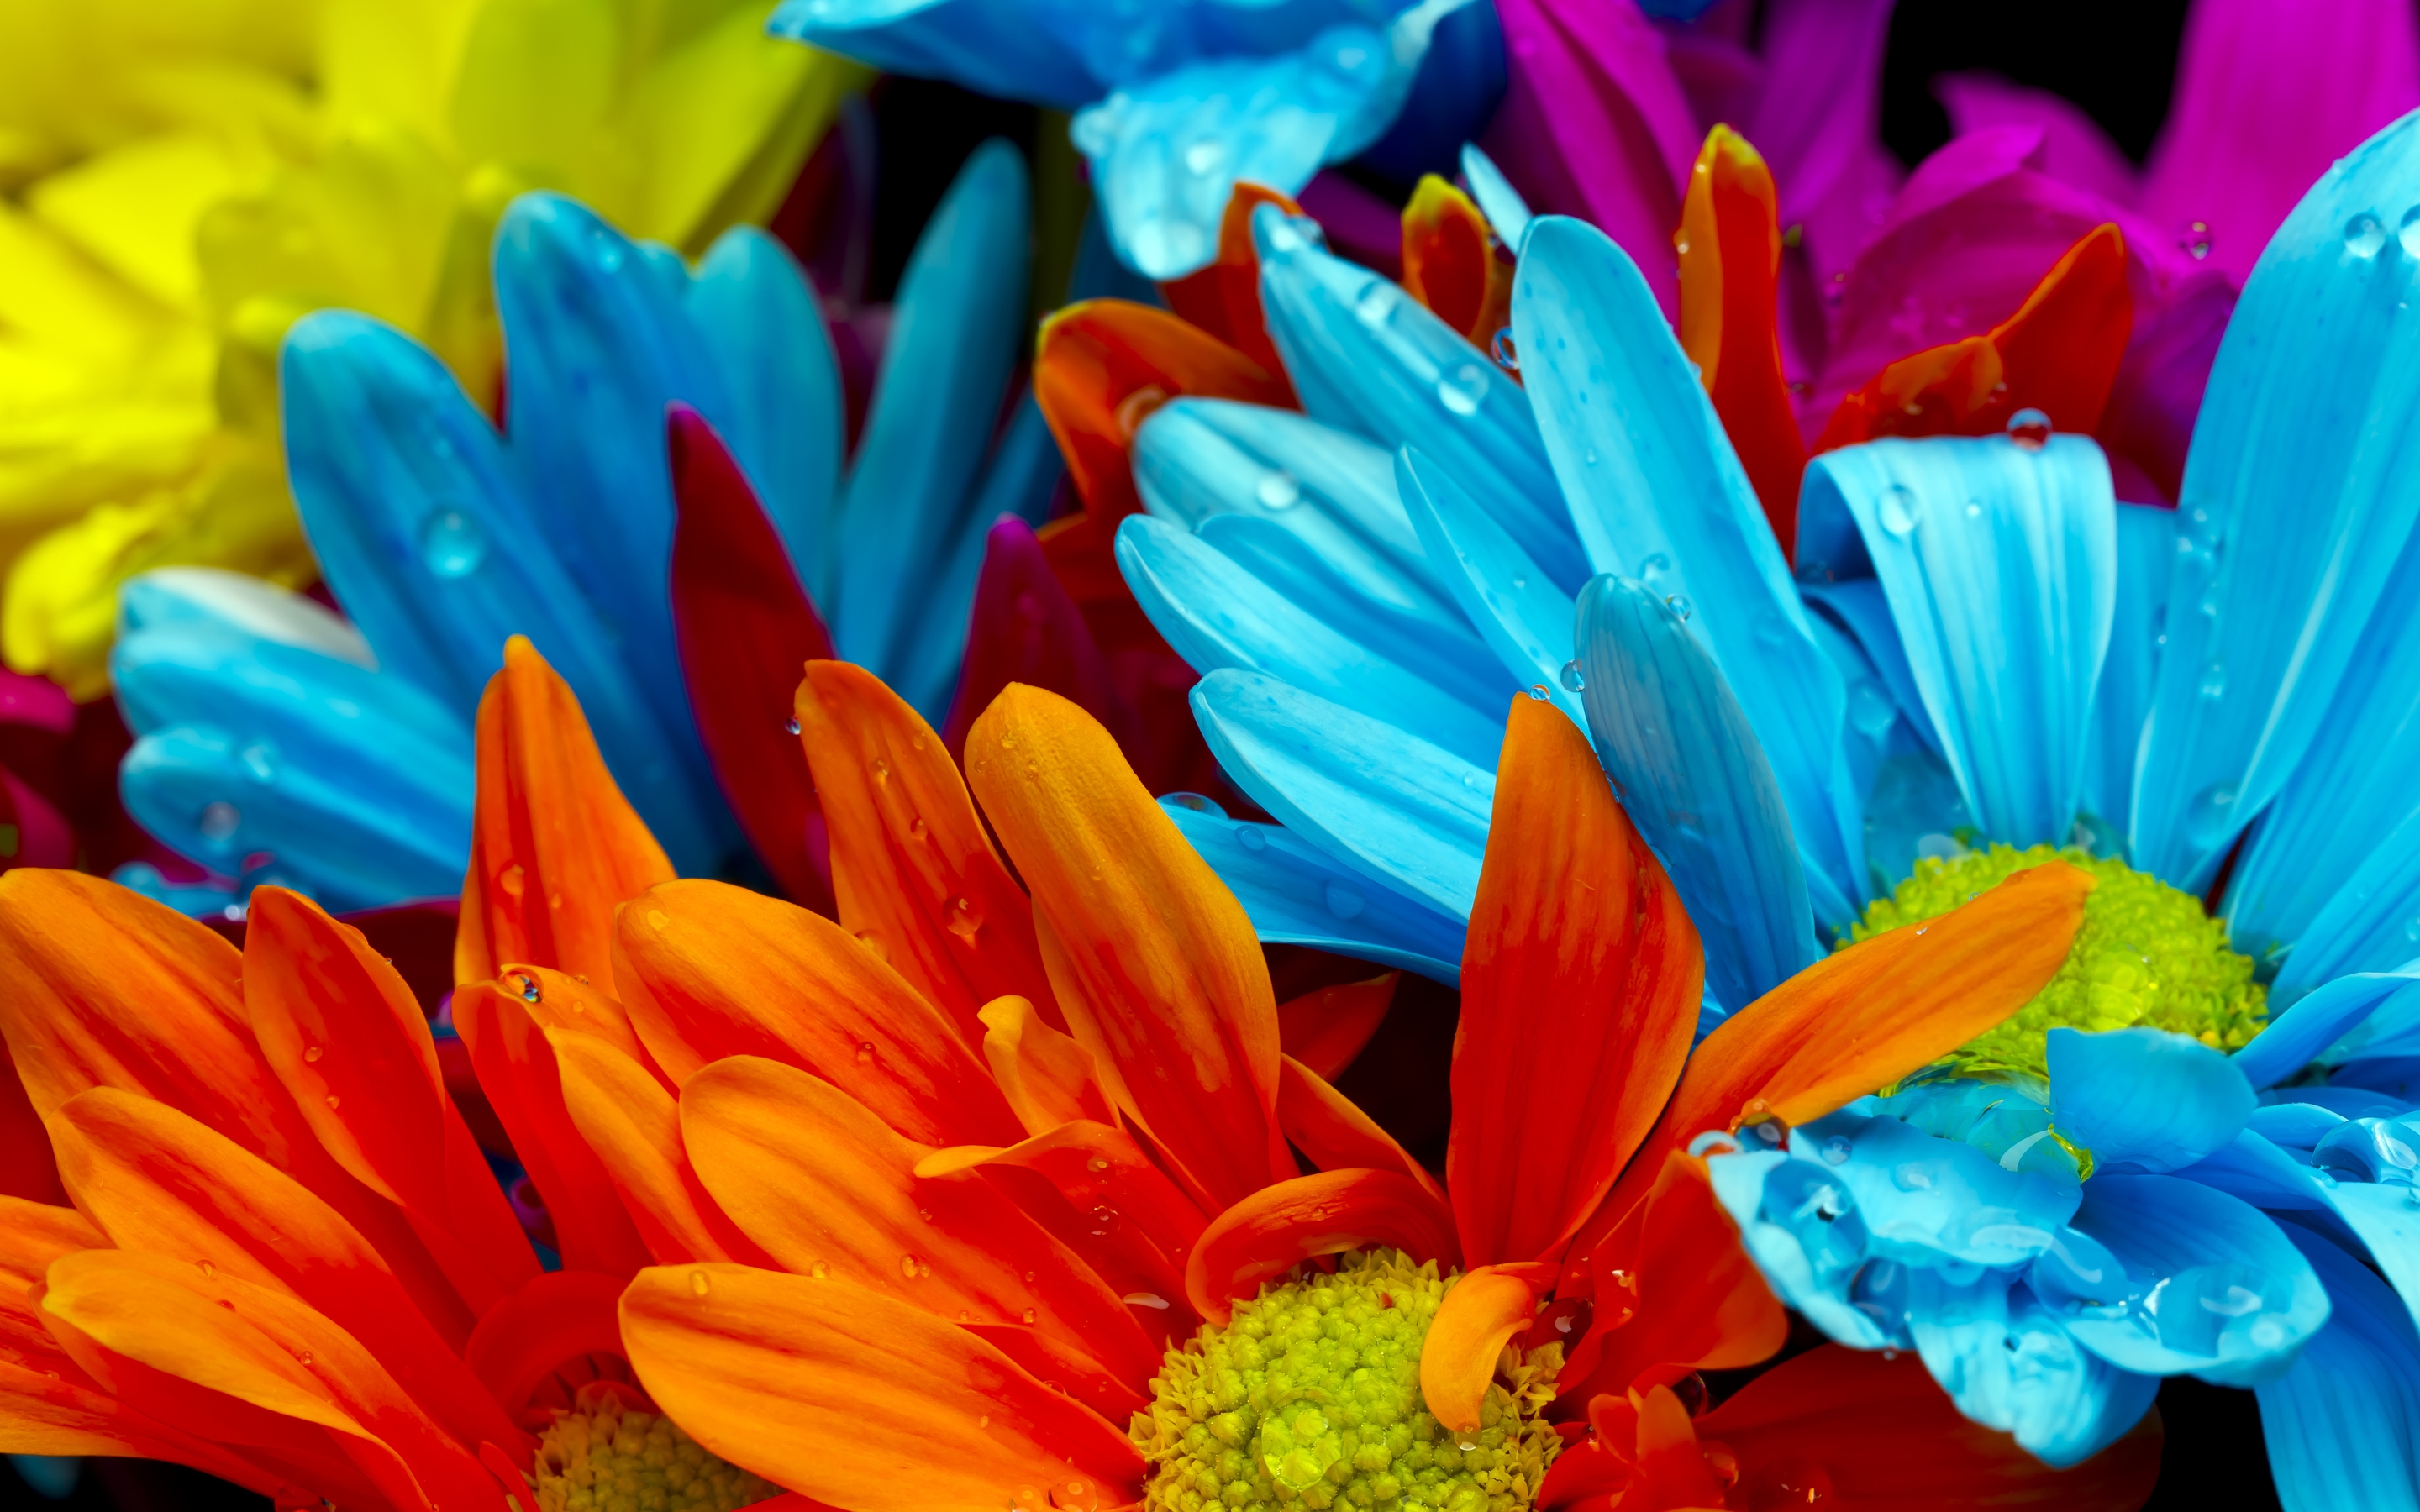 Amazing Flower Colors for 2880 x 1800 Retina Display resolution